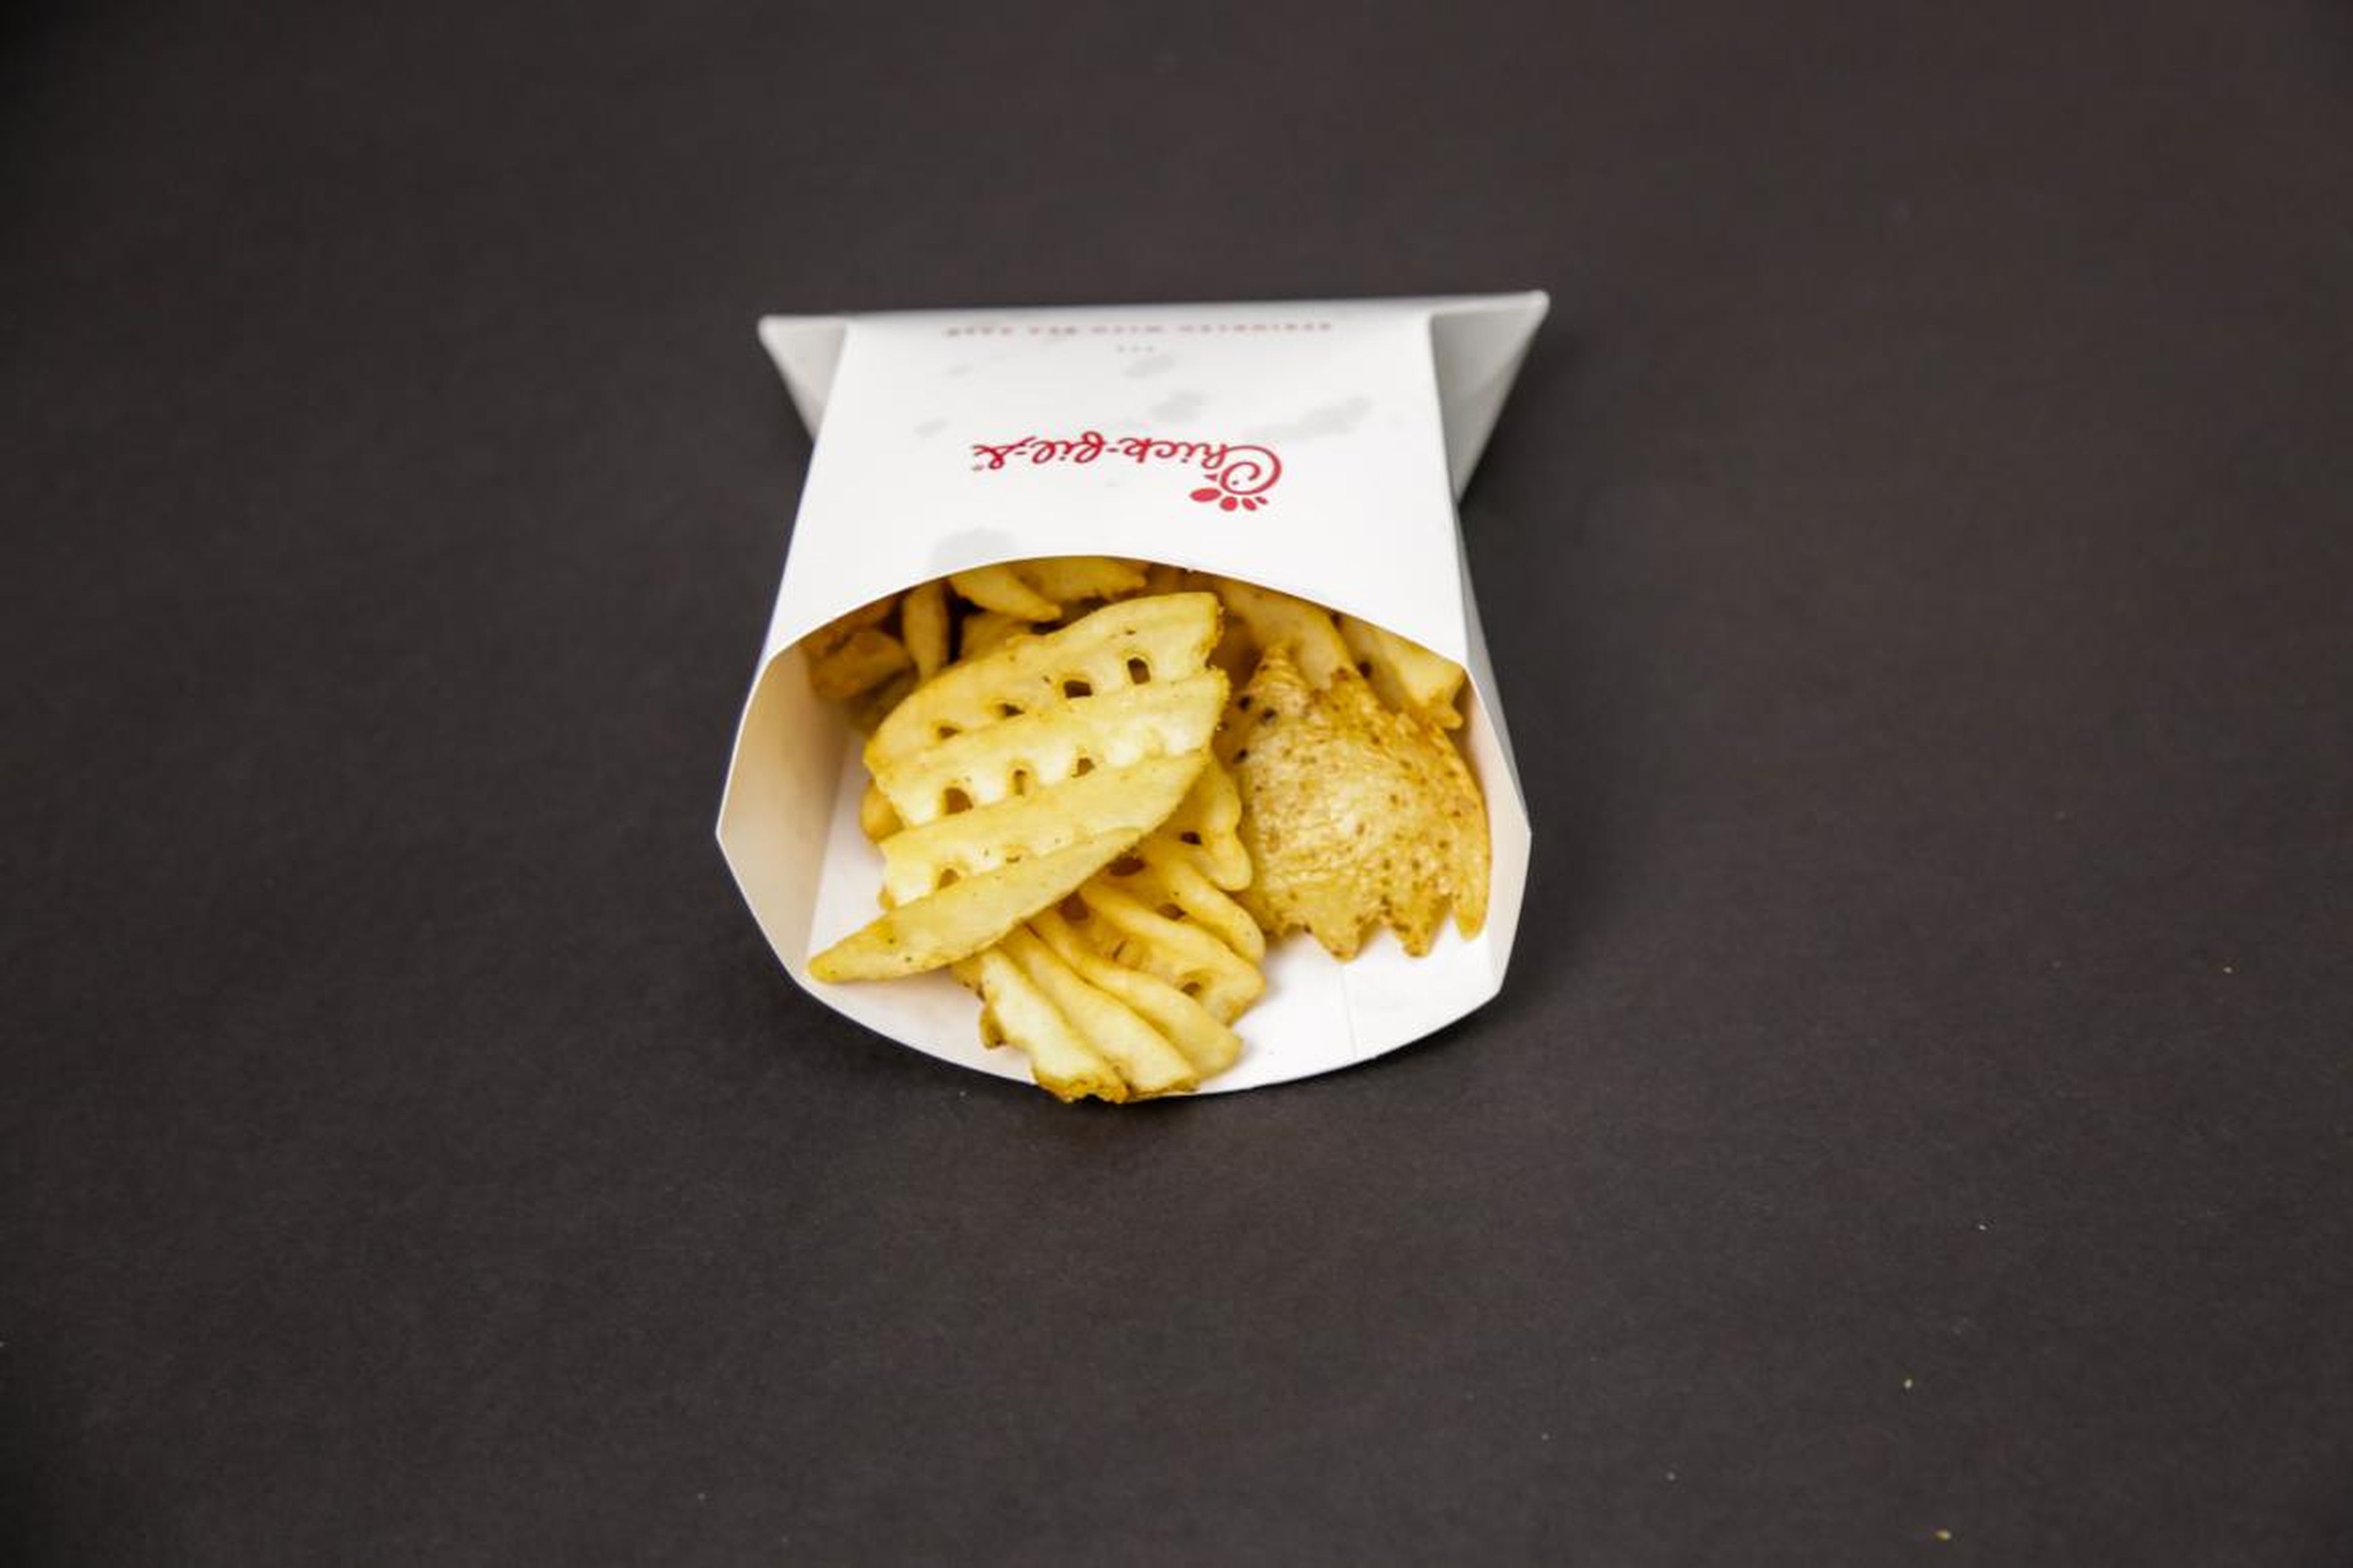 Despite the continuous controversy over Chick-fil-A's charity choices, its fries have their loyal fans.